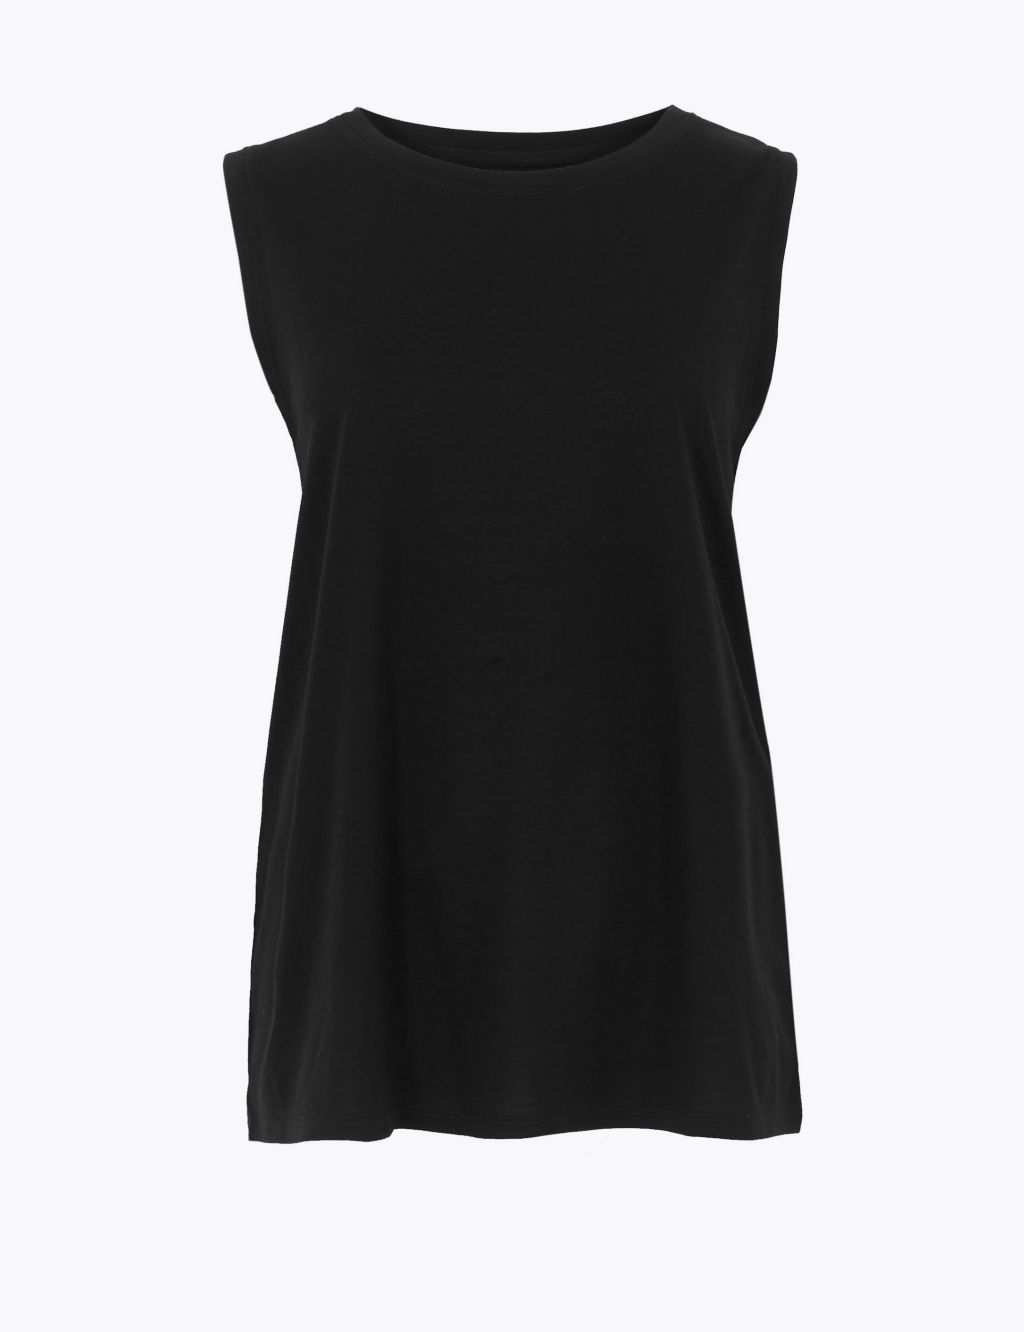 Relaxed Sleeveless Tank Vest Top | M&S Collection | M&S